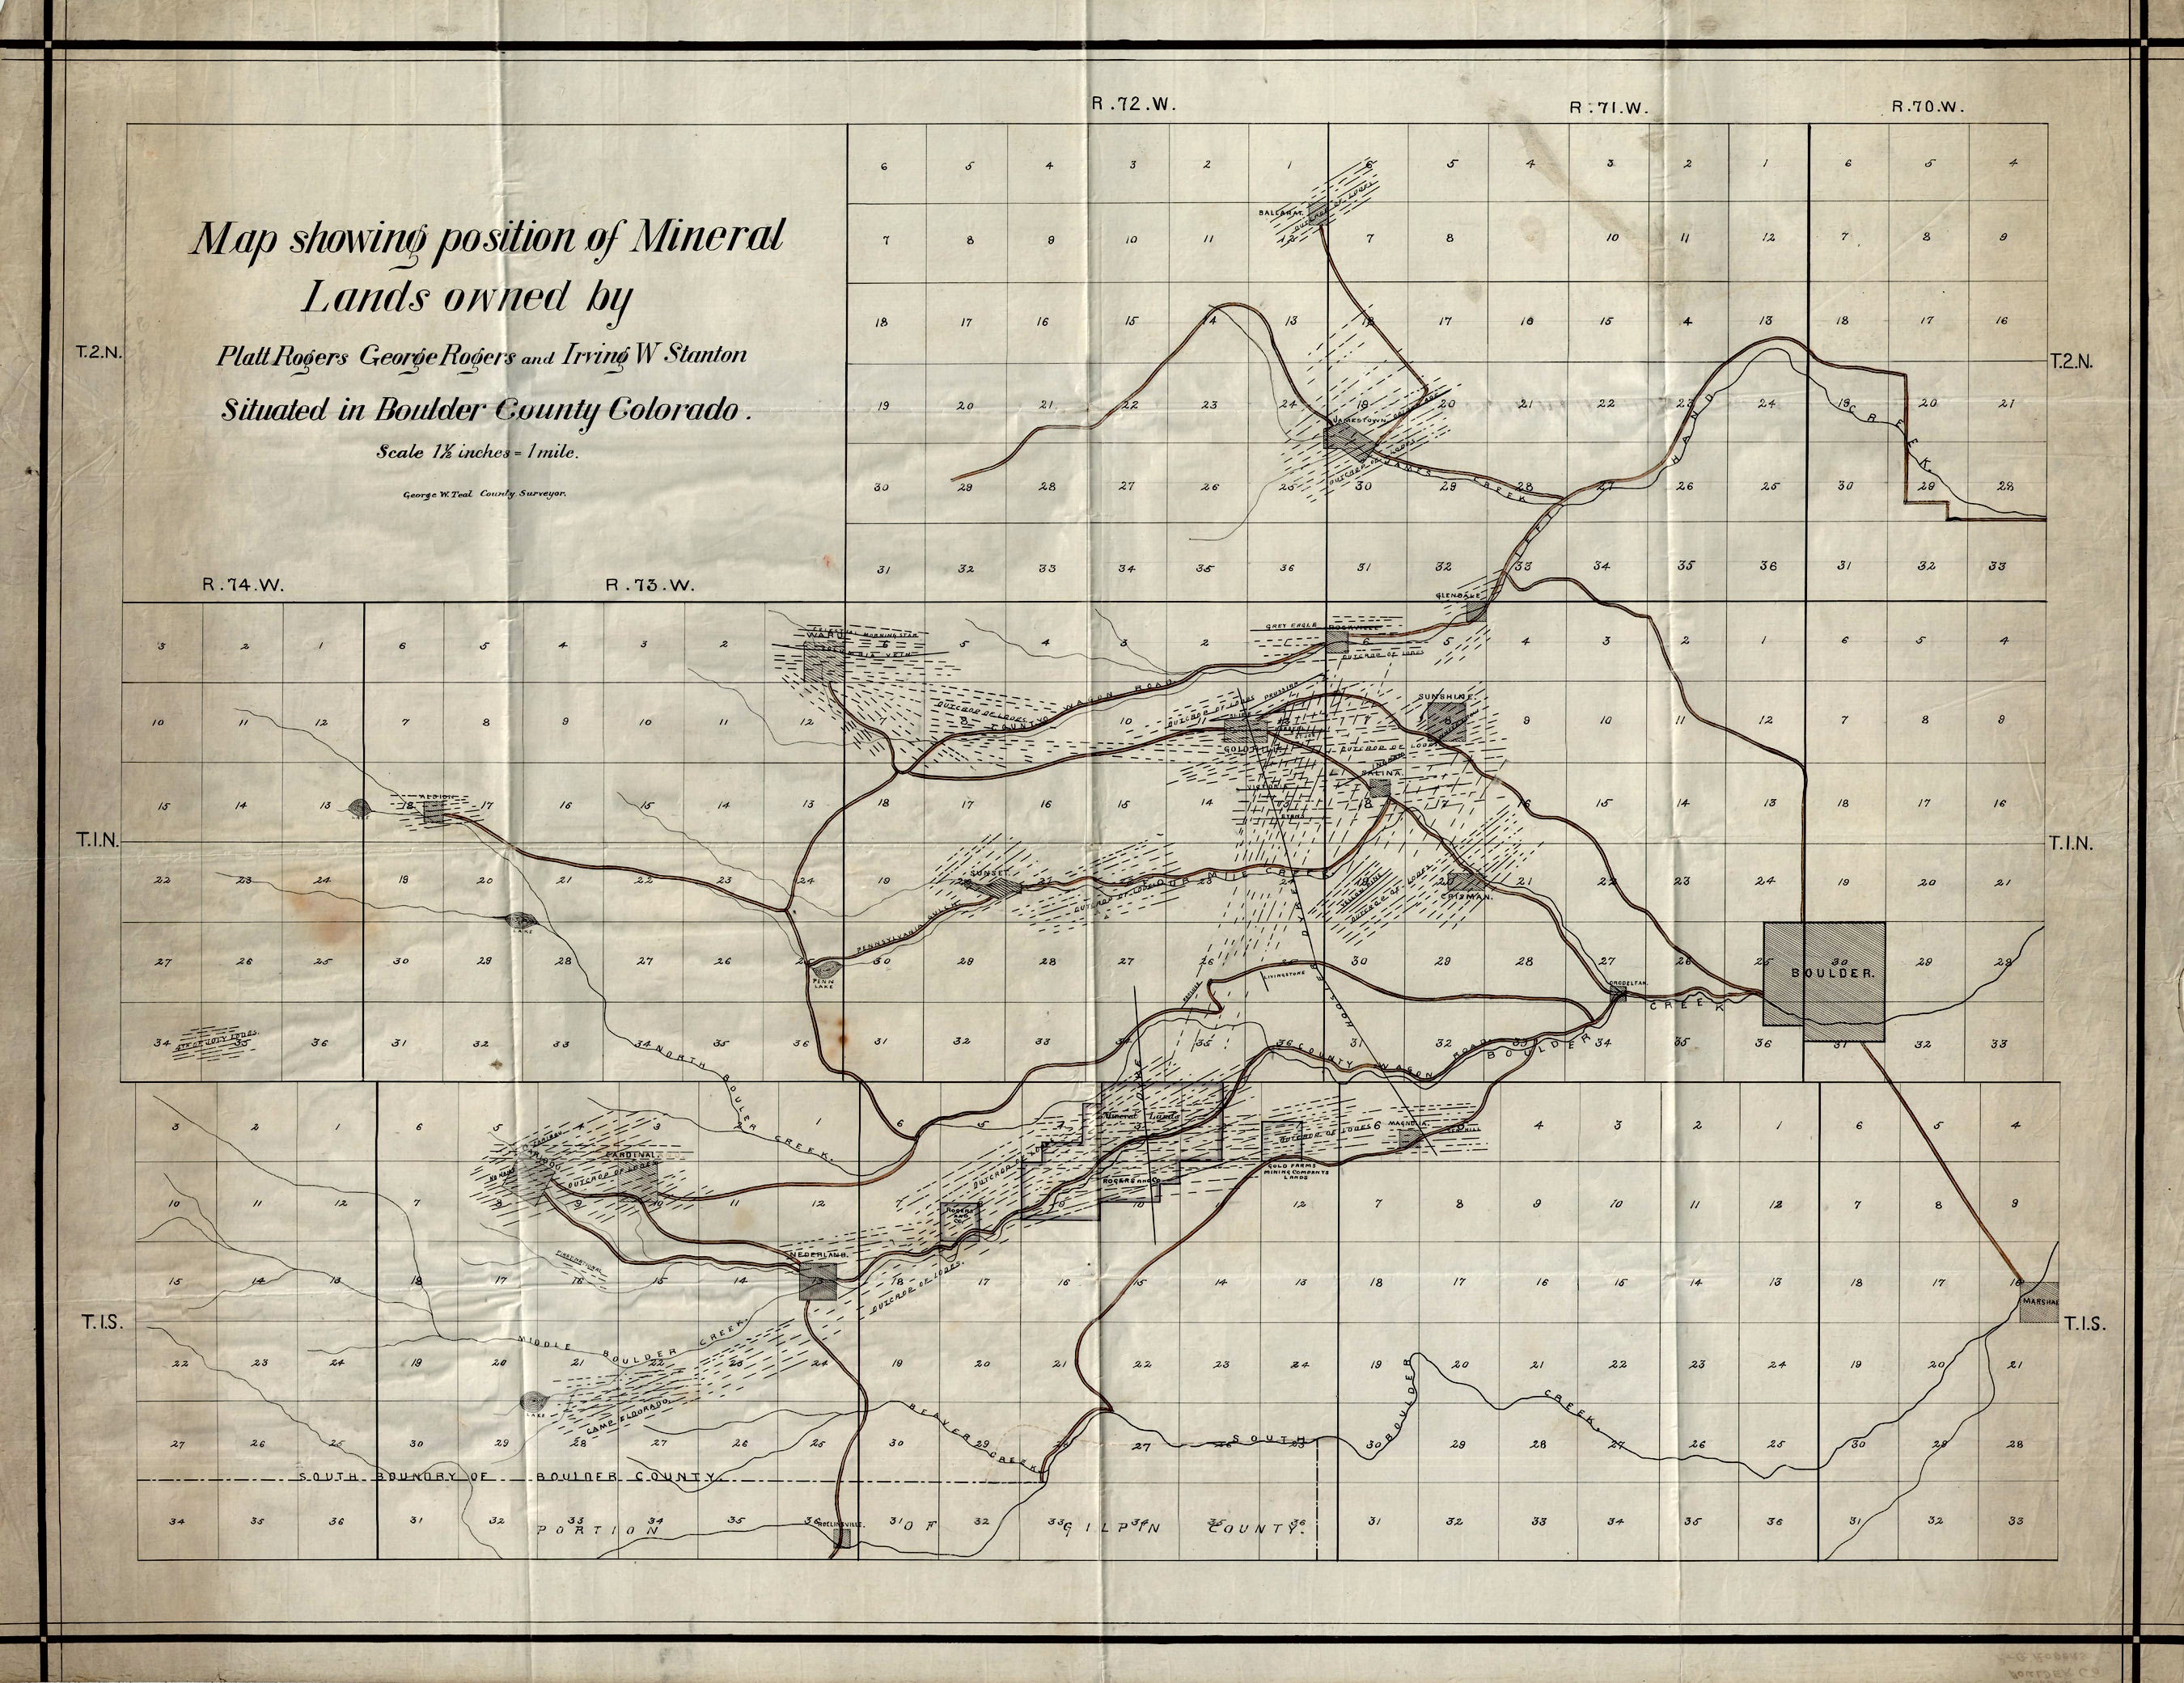 (CO.- Boulder County) Map showing position of Mineral Lands owned by Platt Rogers George Rogers and Irving W. Stanton - Situated in Boulder County Colorado...